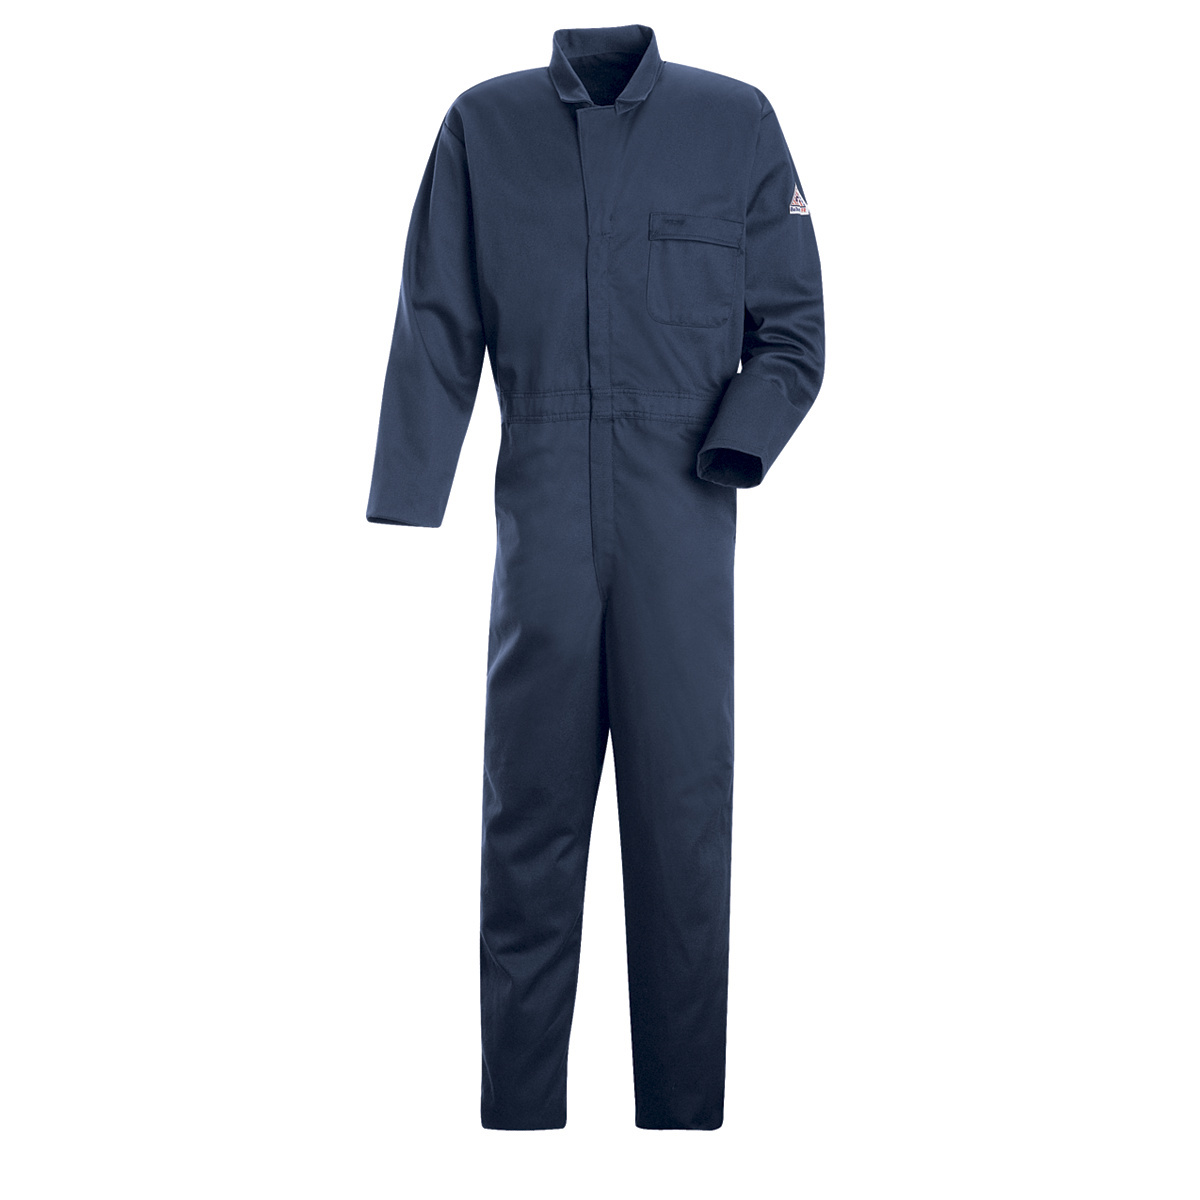 Bulwark® 2X Tall Navy Blue EXCEL FR® Twill Cotton Flame Resistant Coveralls With Zipper Front Closure